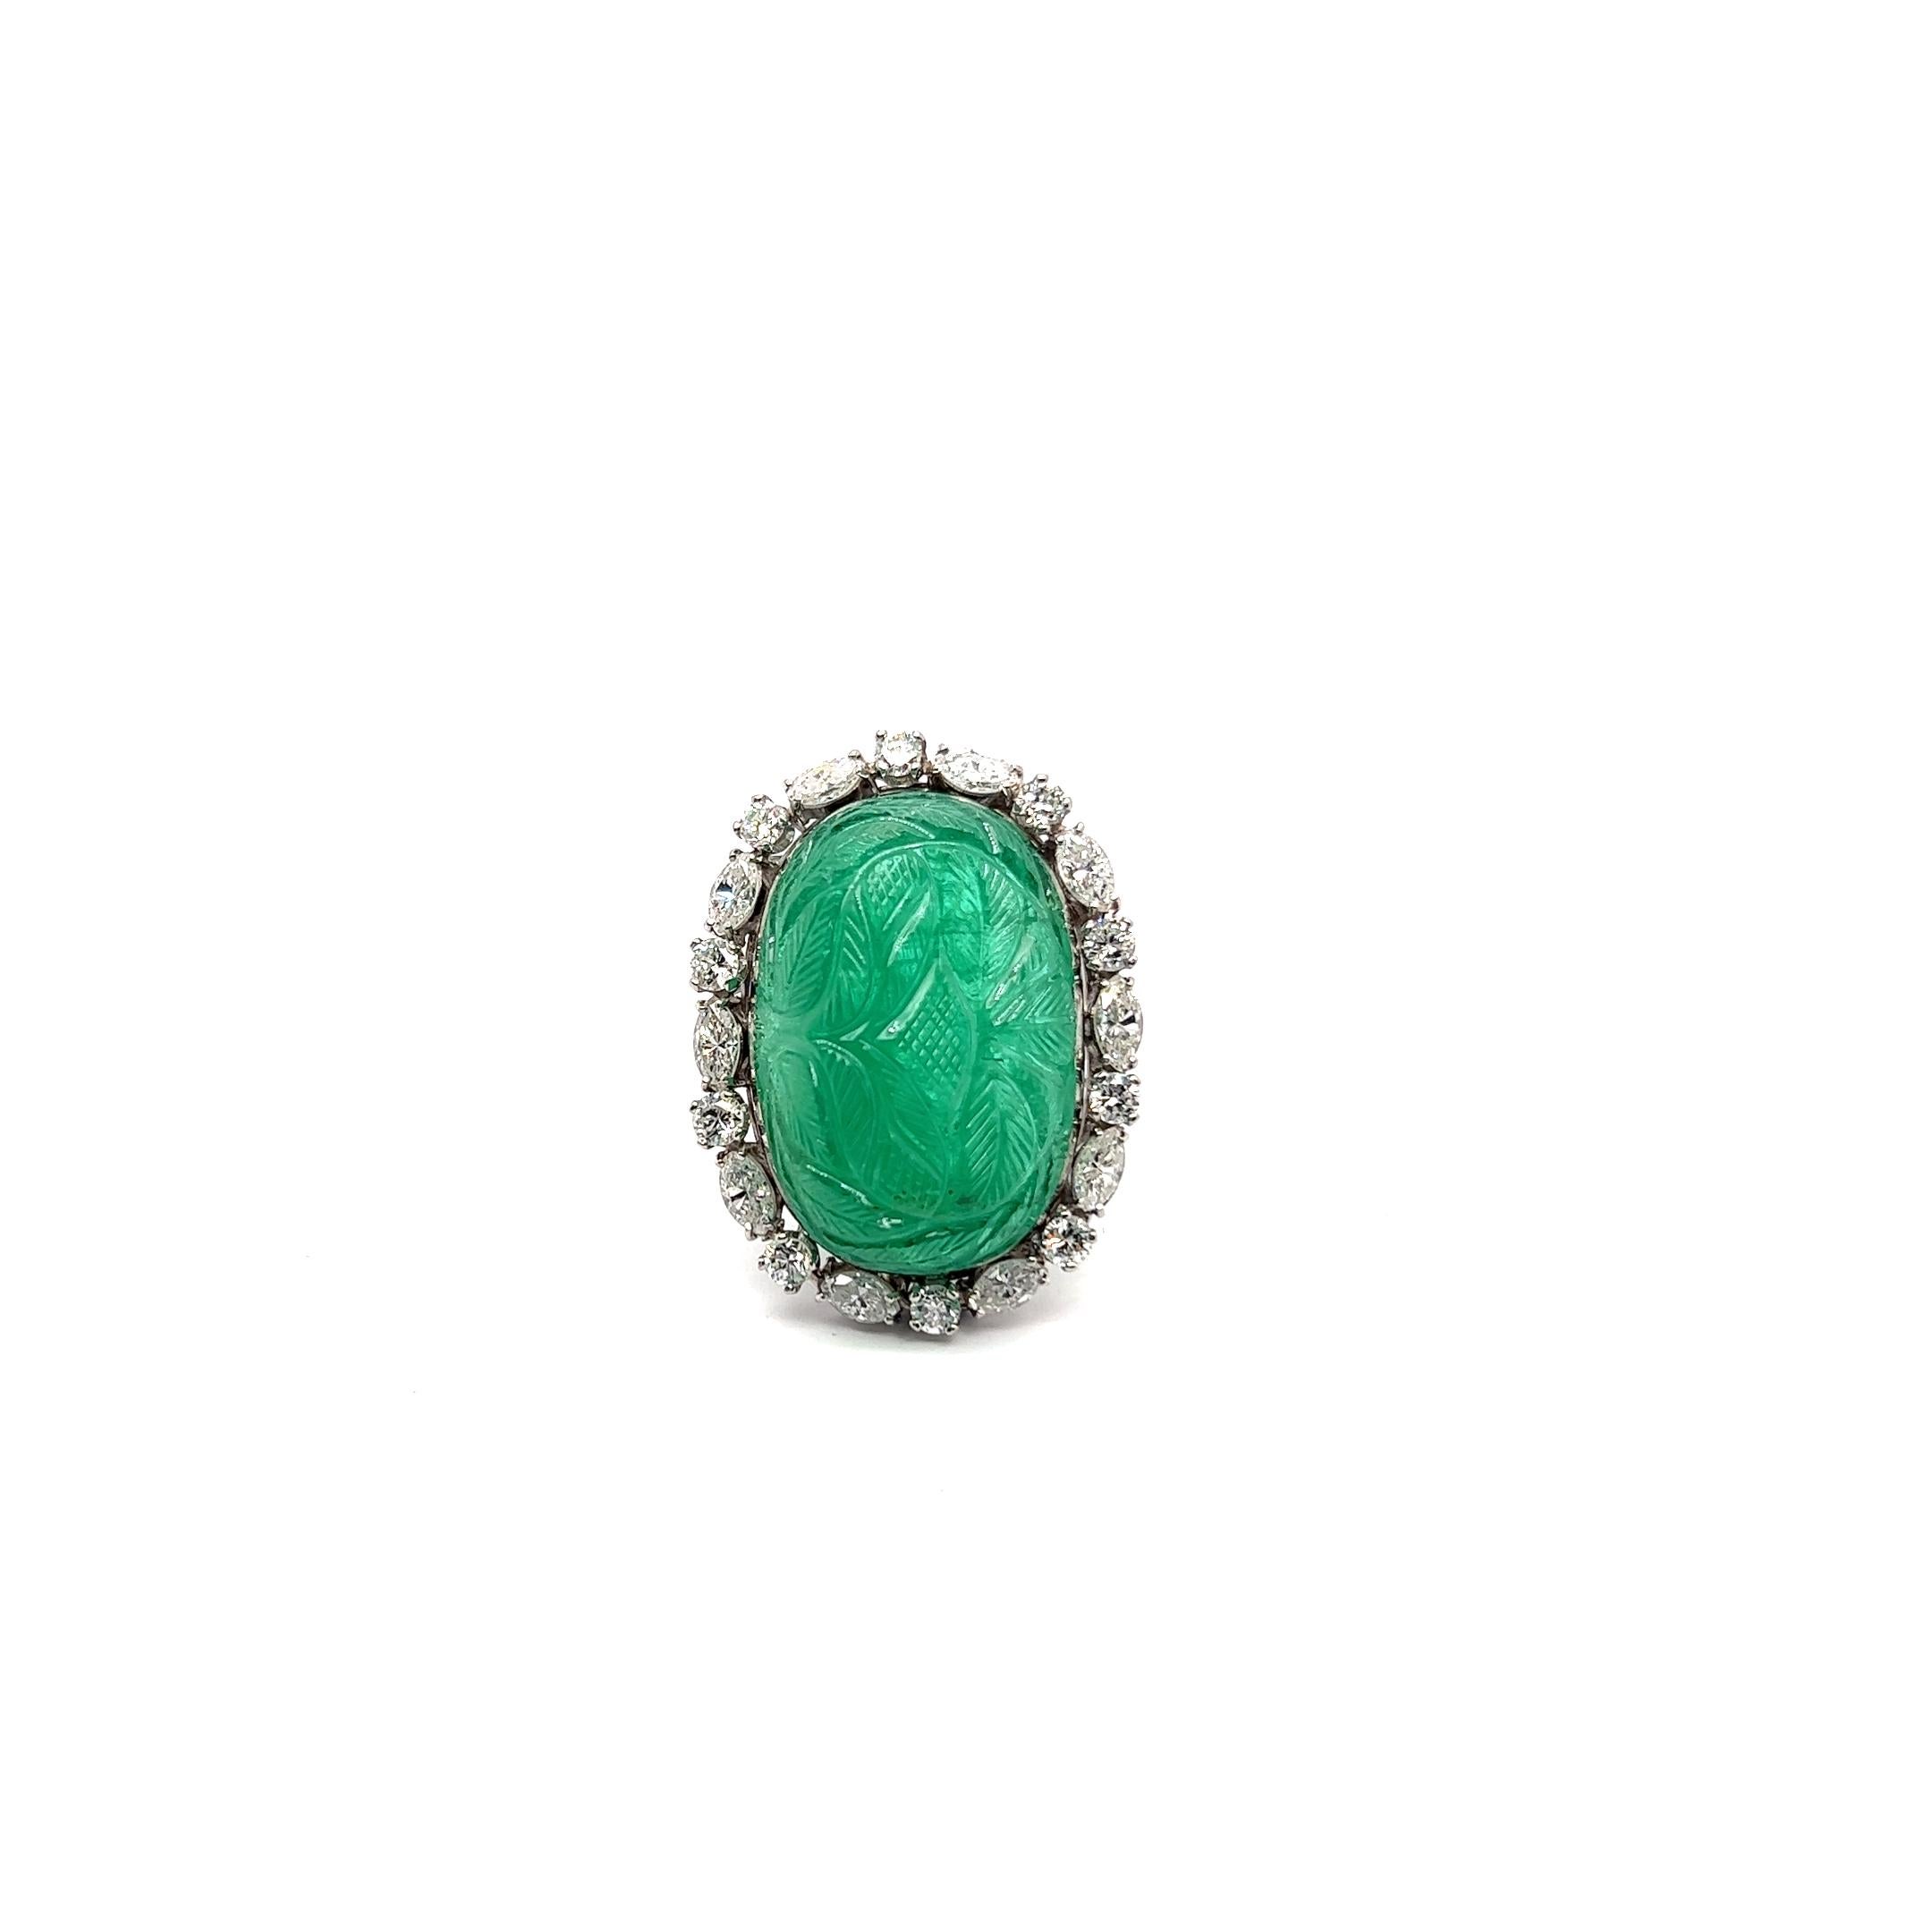 Experience the opulent allure of this emerald ring, celebrating the ancient artistry of gemstone carving. Rooted in history, this tradition began over 5,000 years ago in Ancient Egypt, where skilled artisans adorned themselves with intricately